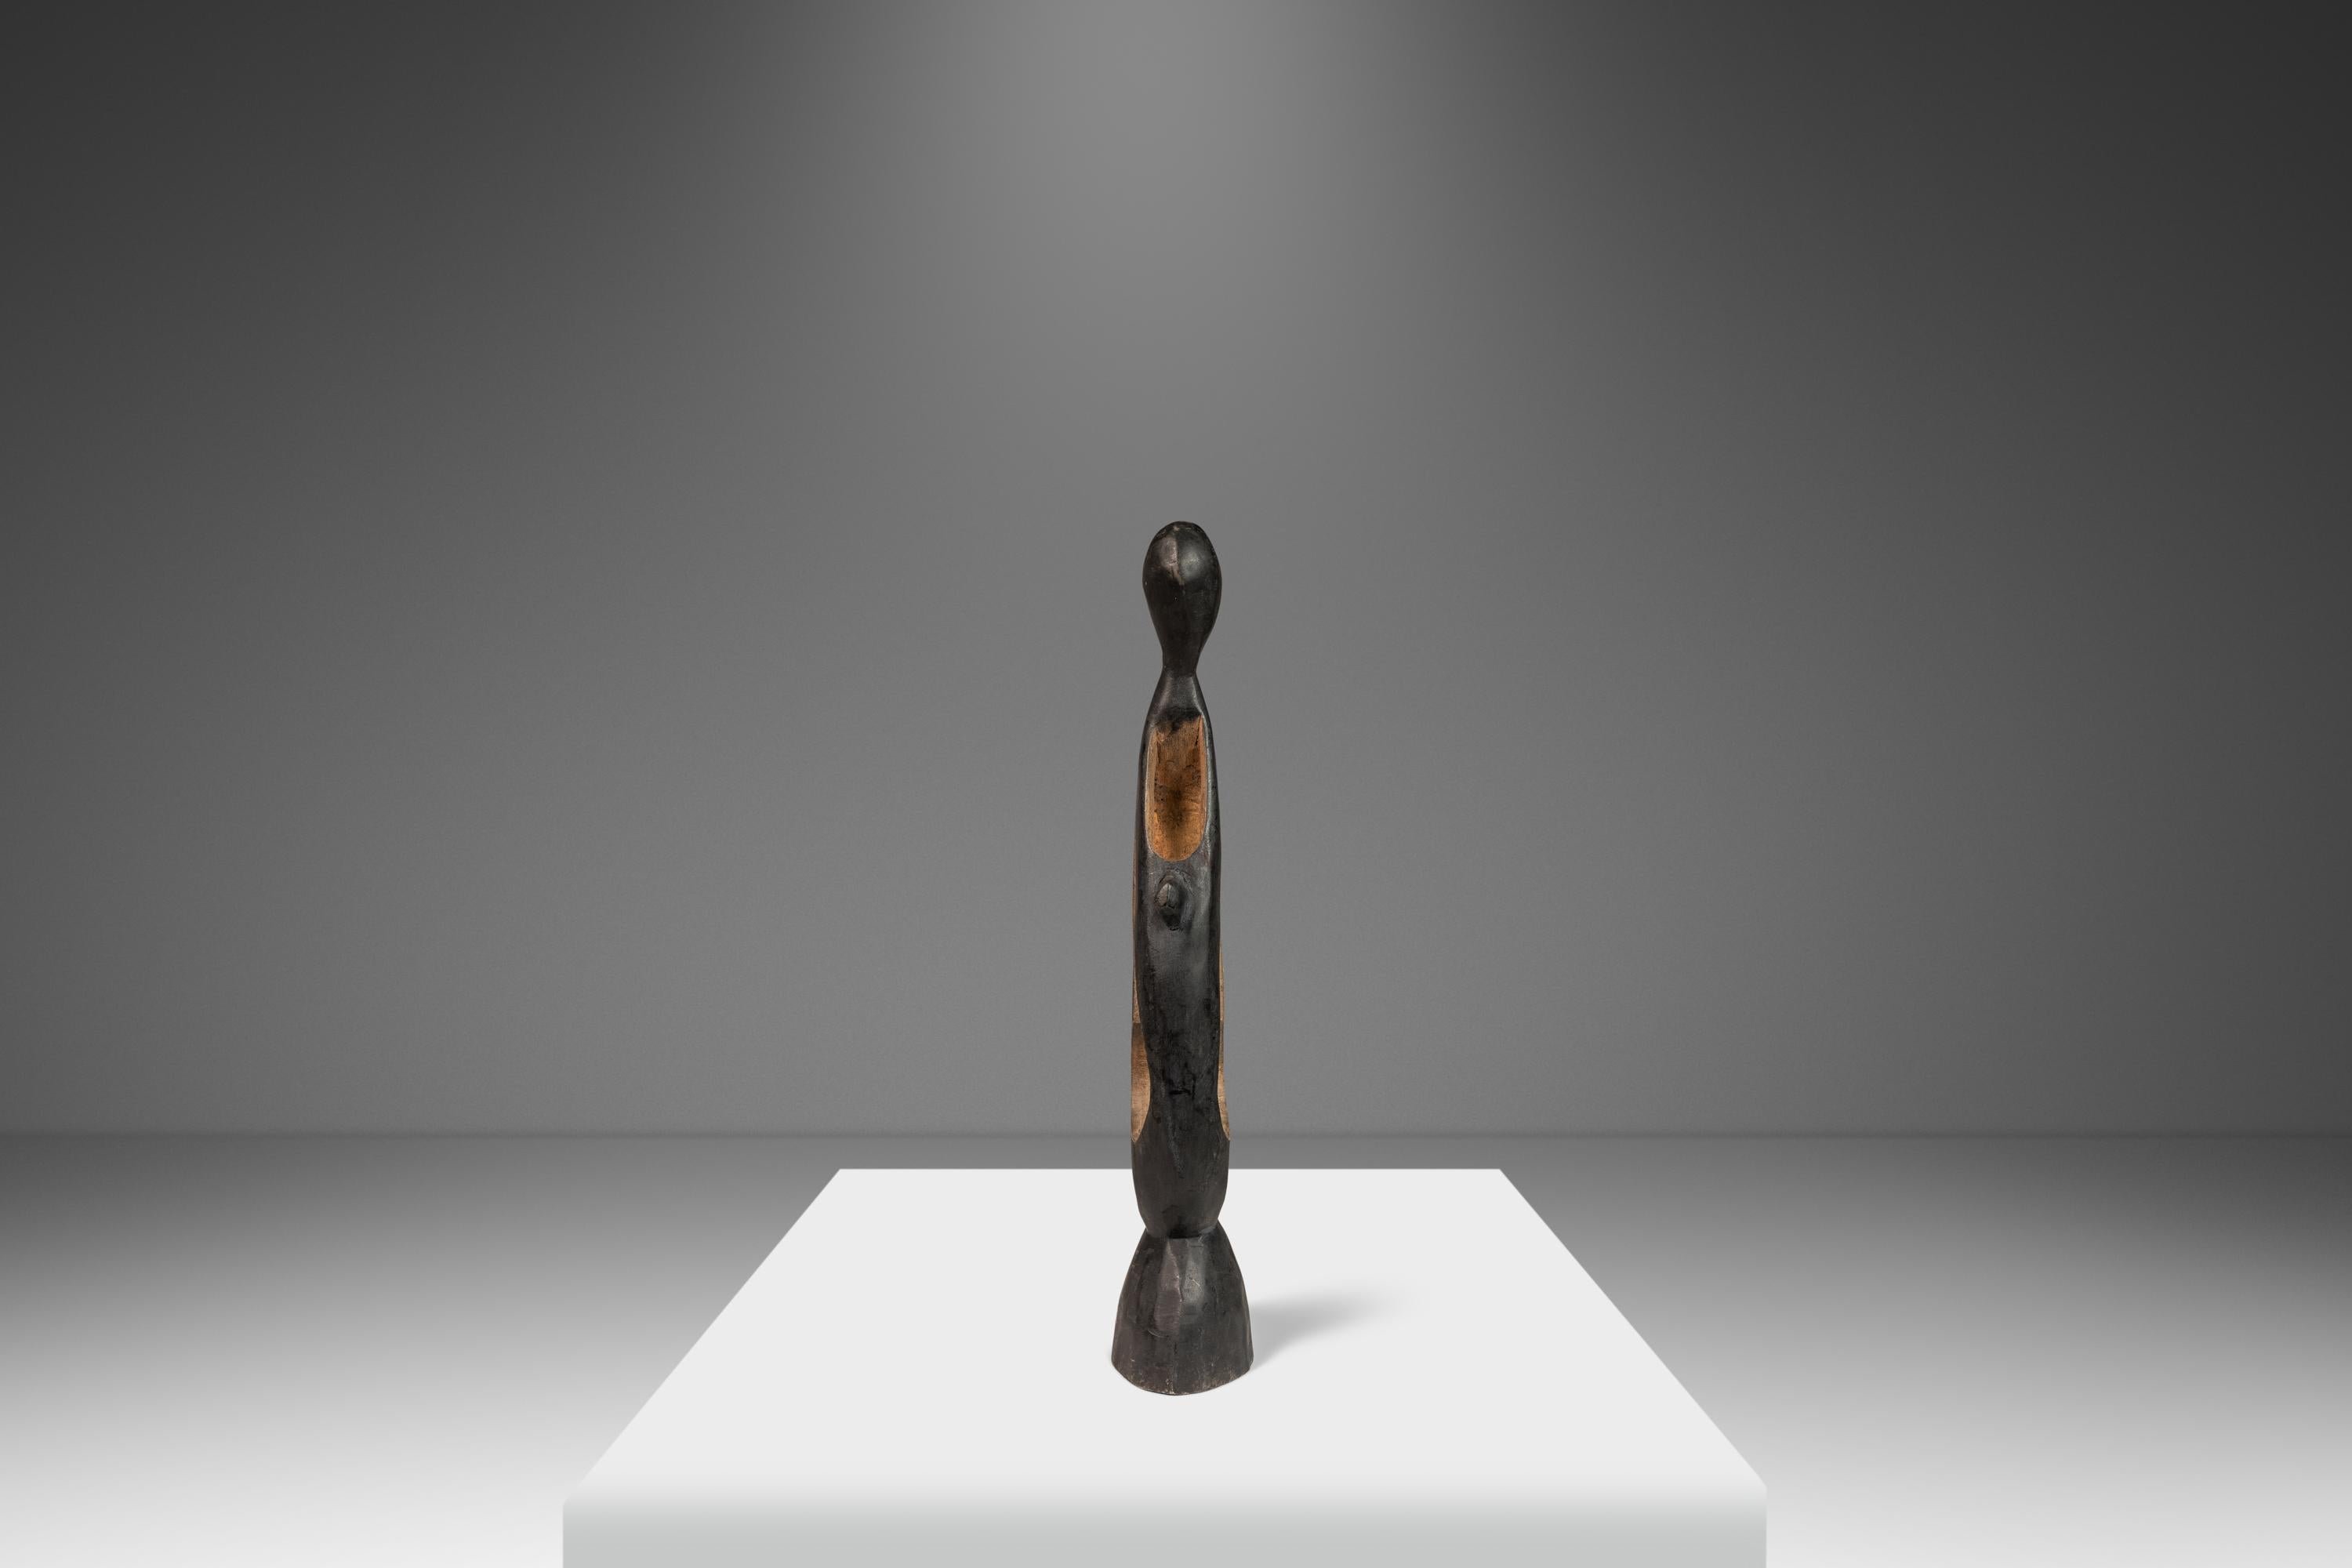 Introducing a heart-warming abstract sculpture depicting a parent with child in embrace. Hand-carved in solid walnut with an alluring ebonized this exquisite, visually captivating sculpture is the perfect gift to new parents or for collectors